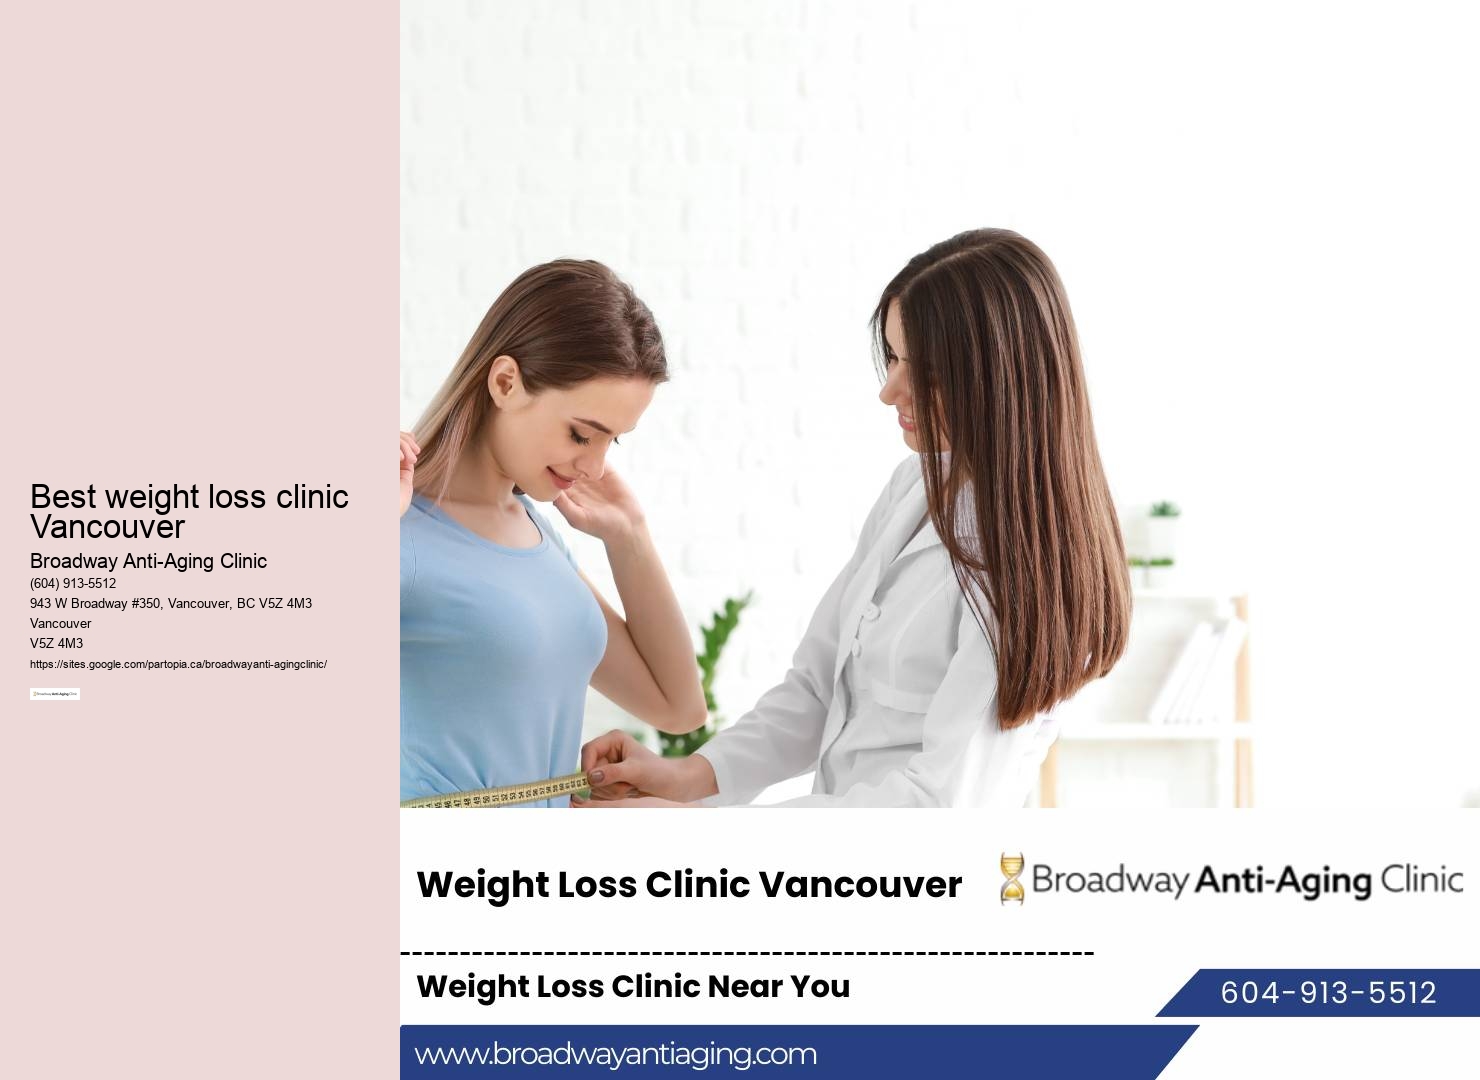 Best weight loss clinic Vancouver